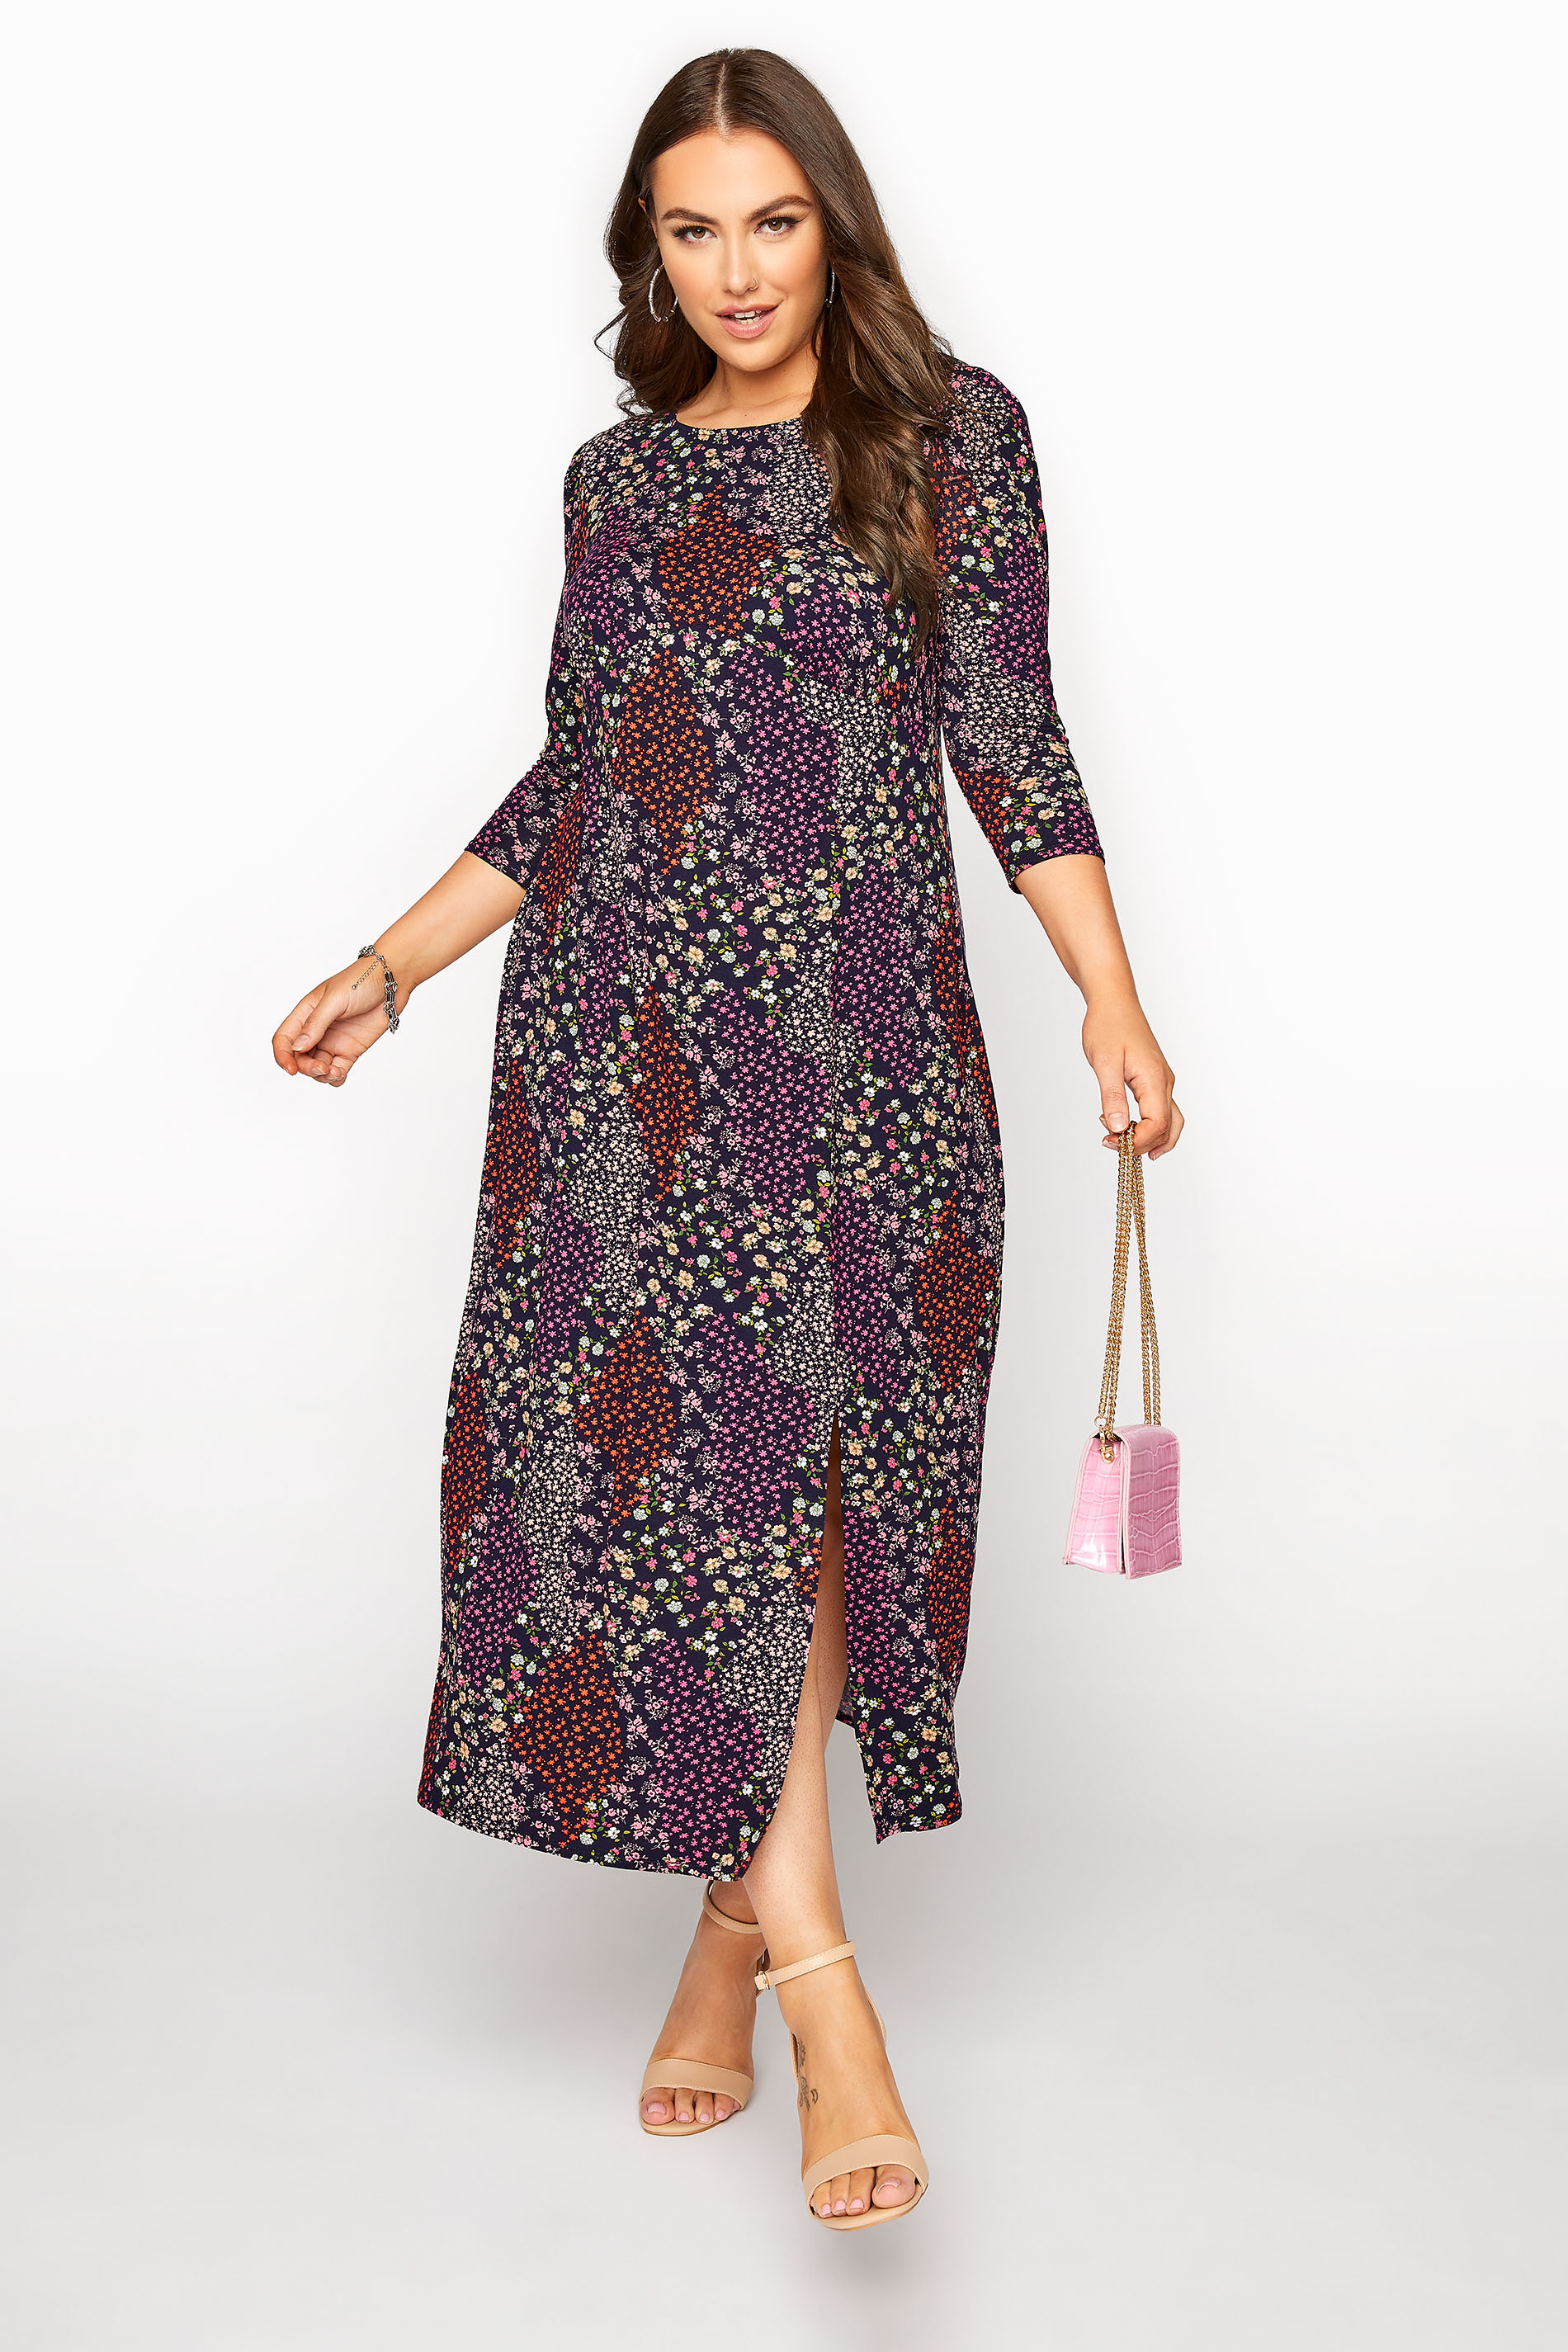 Robes Grande Taille Grande taille  Robes Imprimé Floral | YOURS LONDON - Robe Bleue Marine Petites Fleurs - NG68282